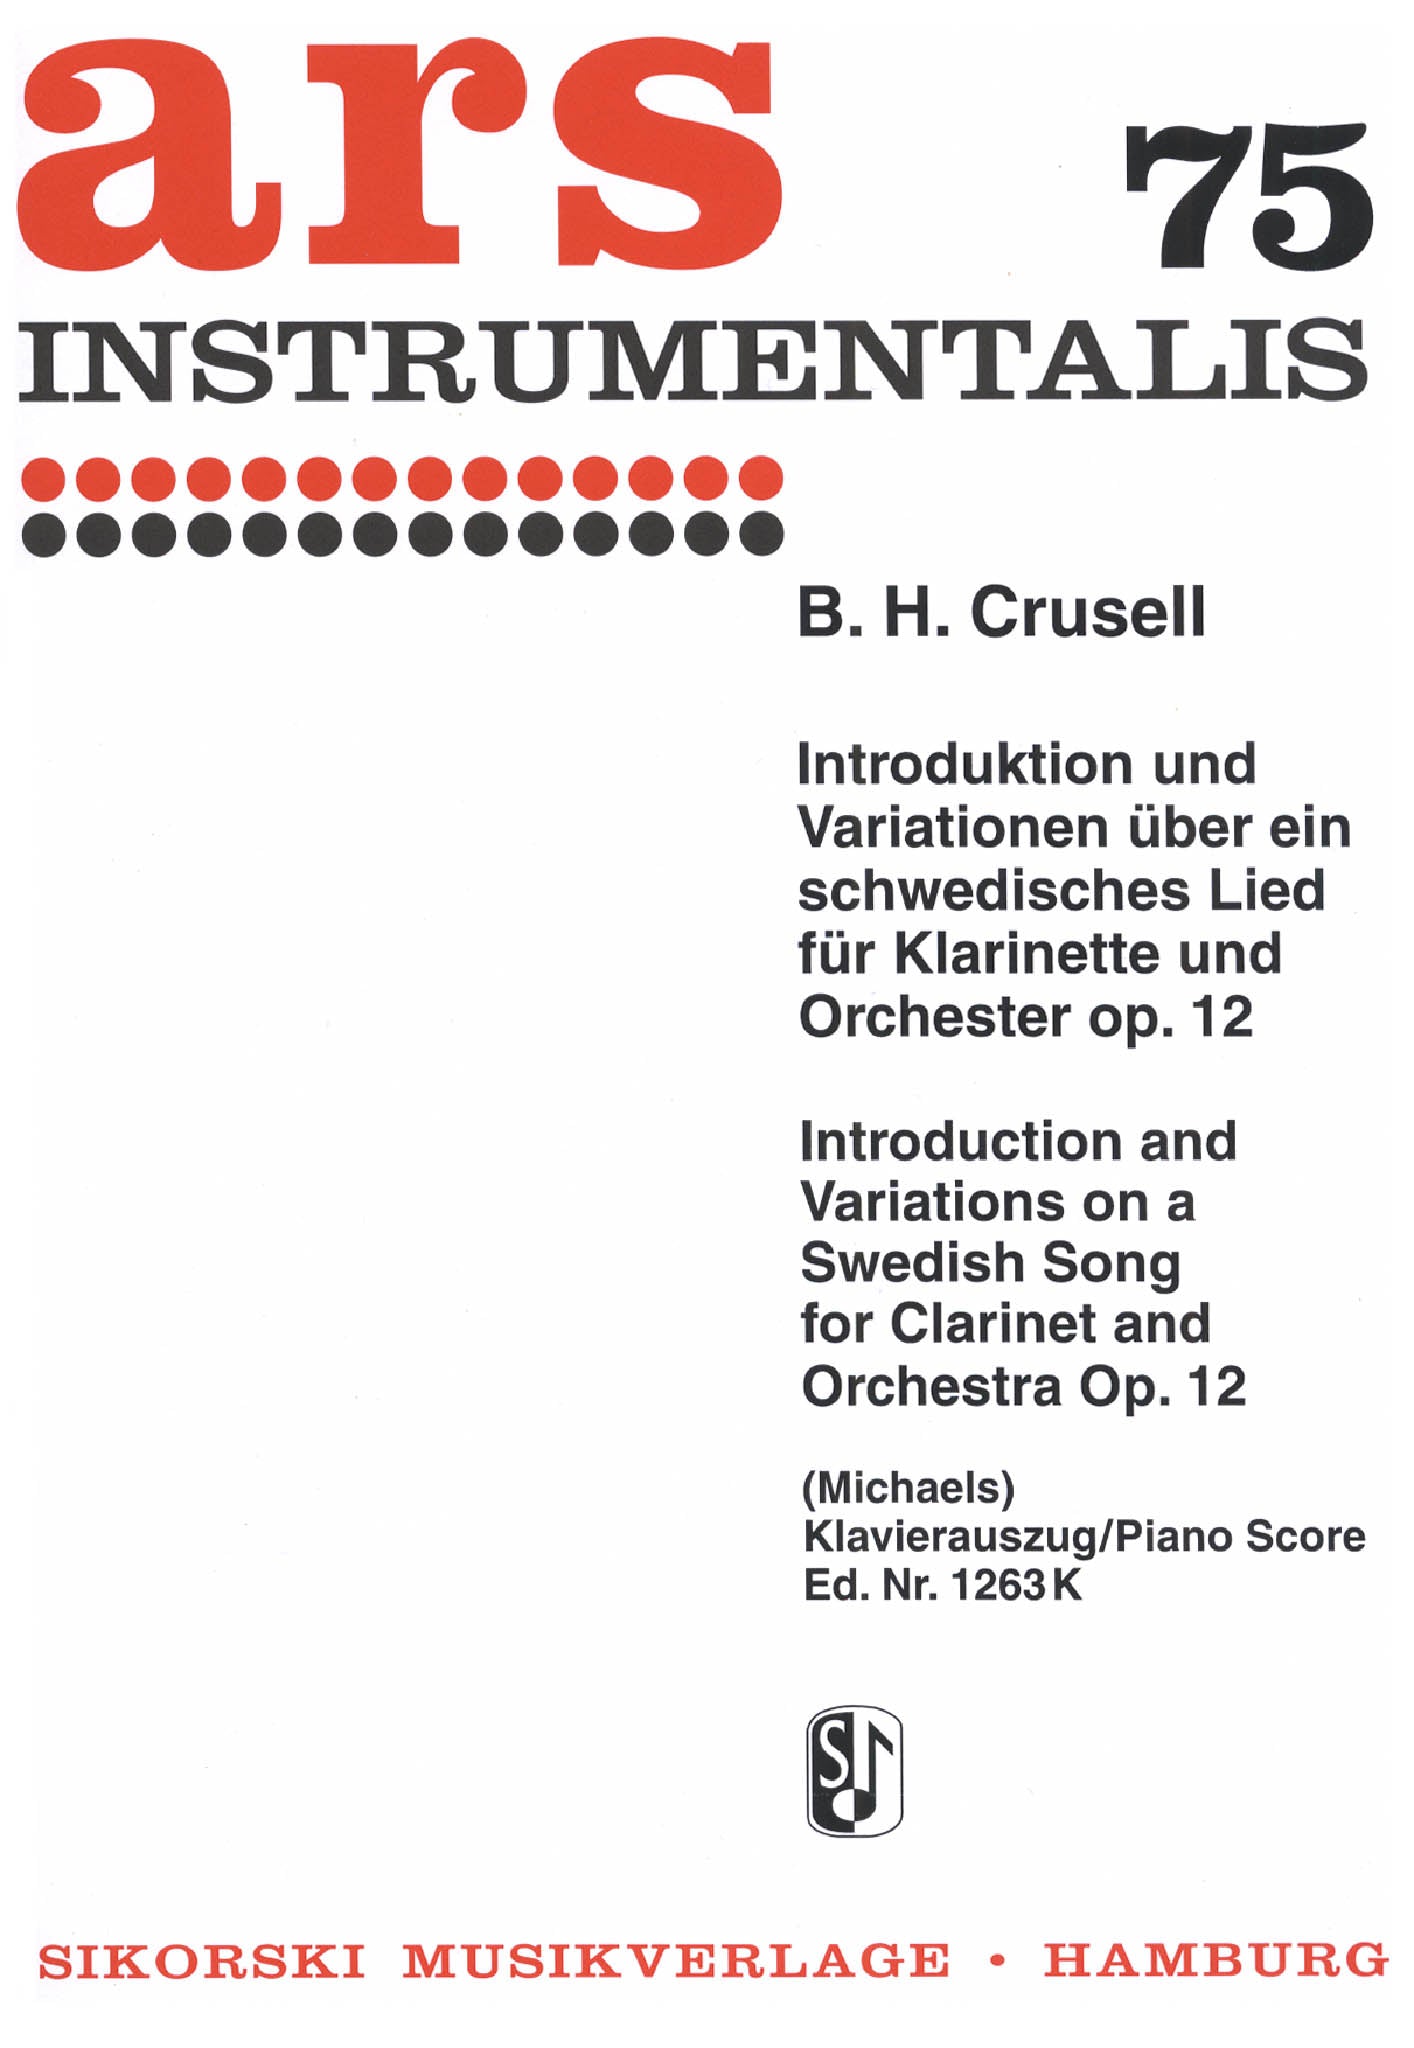 Crusell Introduction et Air suedois, Op. 12 Cover